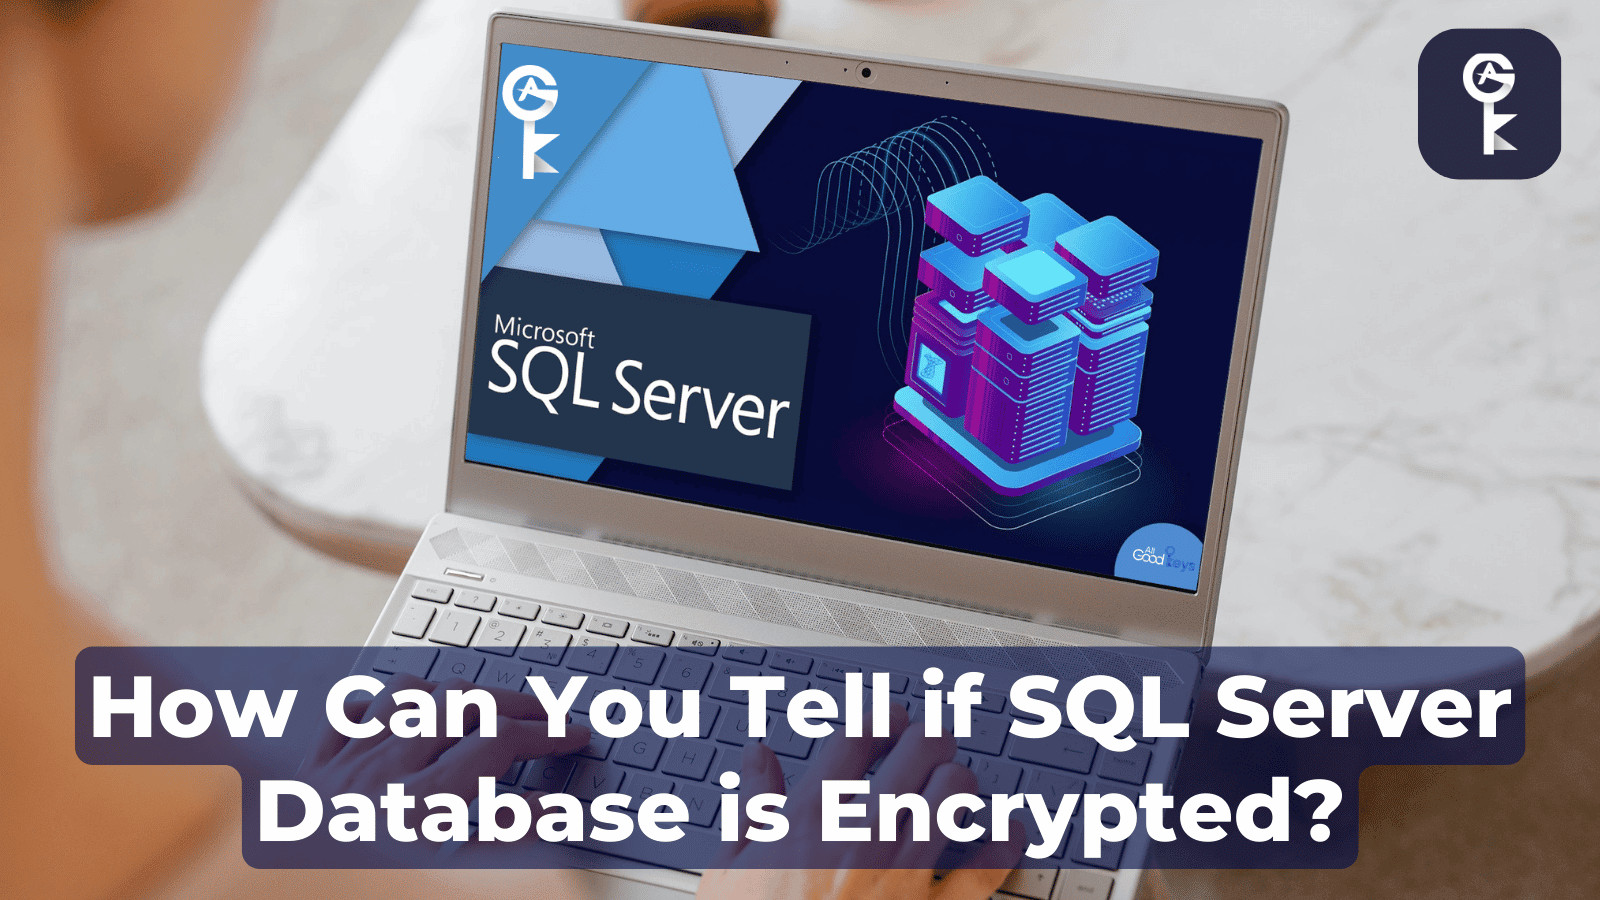 How Can You Tell if SQL Server Database is Encrypted?